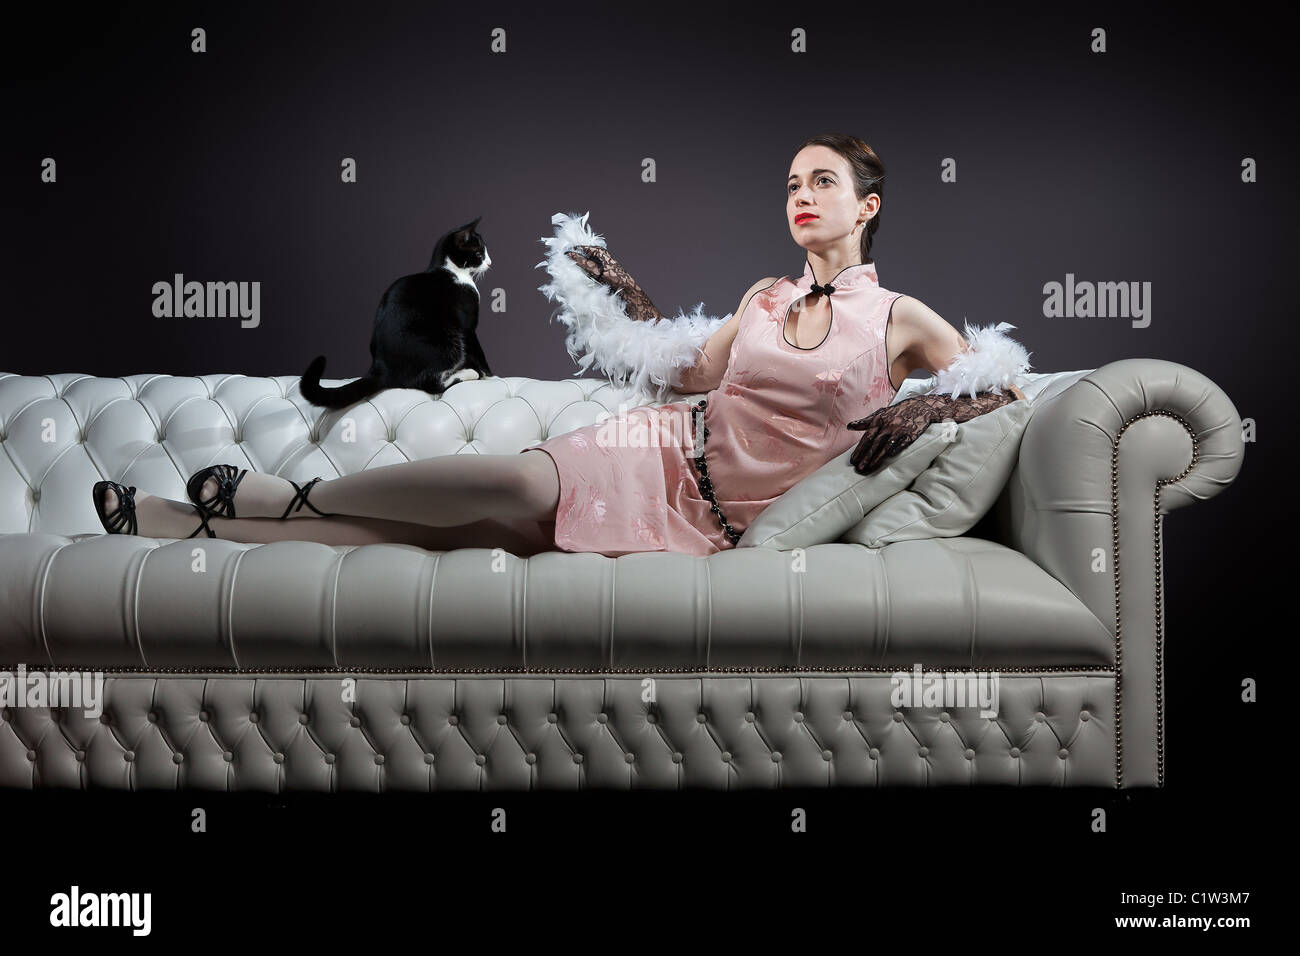 An elegant vintage lady is lying on a sofa, with a kitten looking at her feather boa. Stock Photo